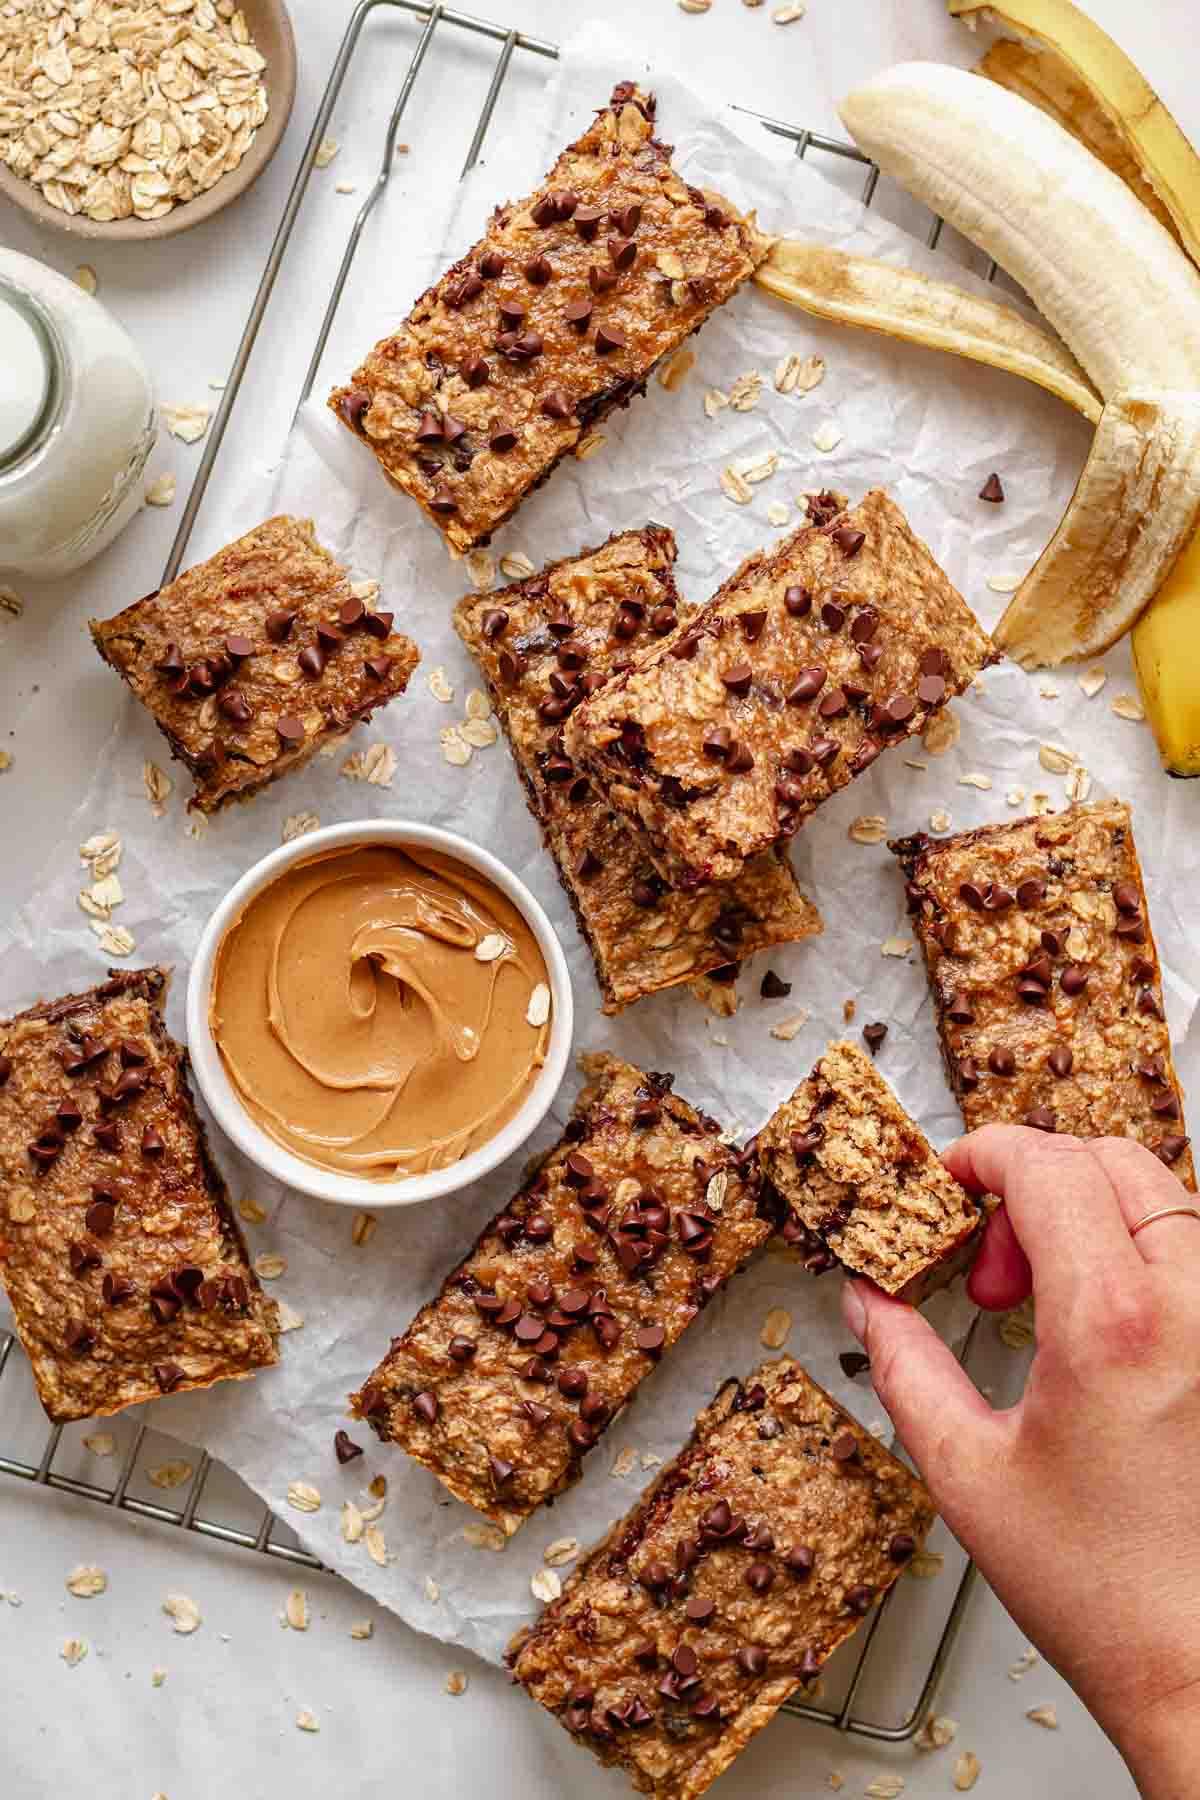 A hand reaches in to take a slice of peanut butter oatmeal bar.